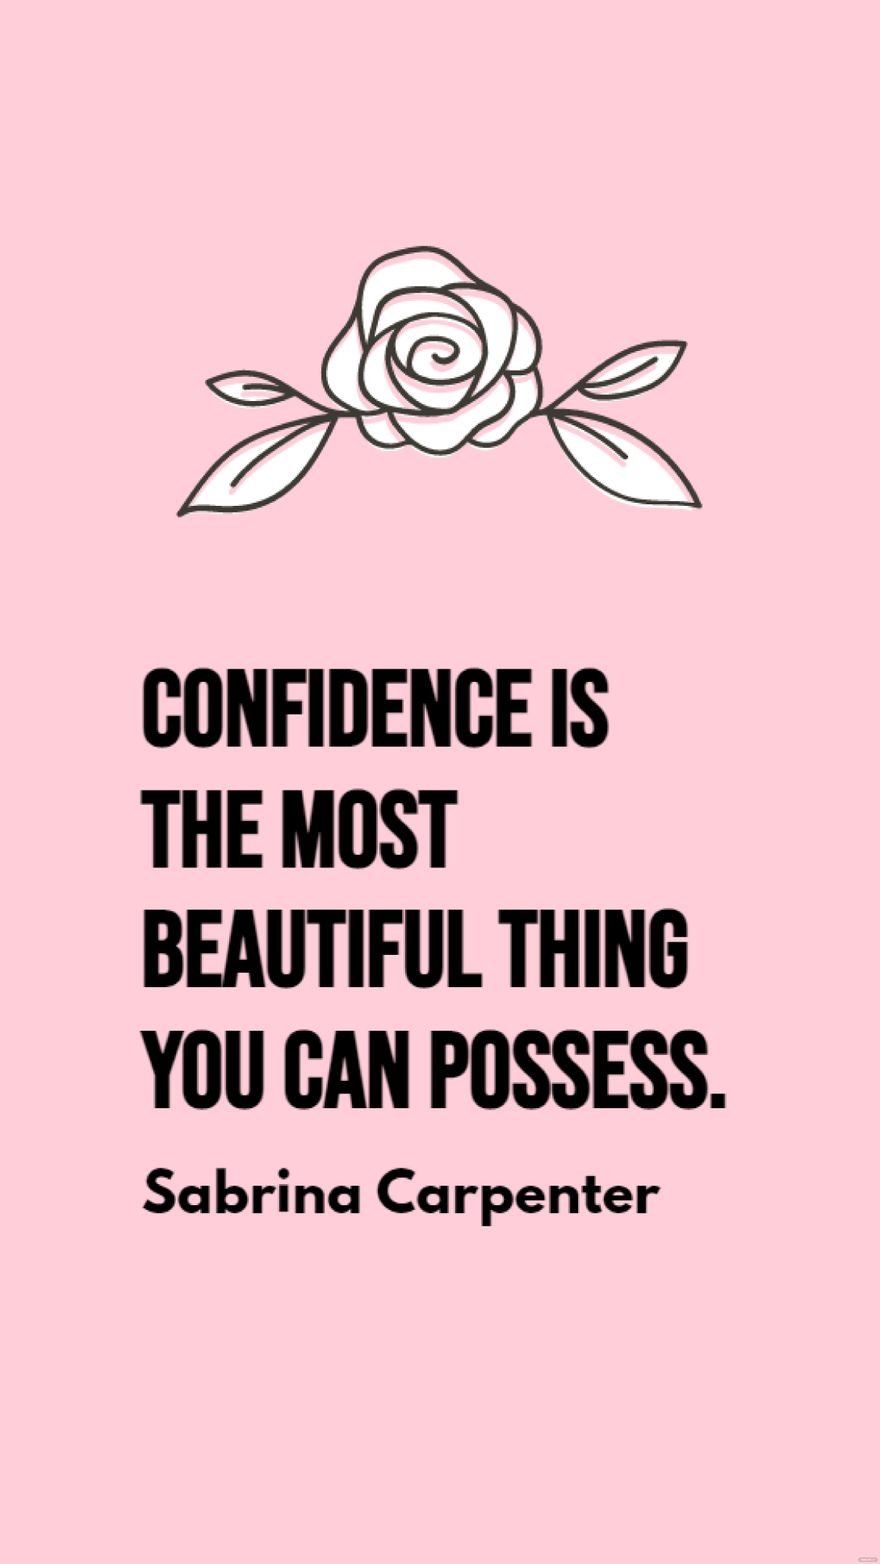 Free Sabrina Carpenter - Confidence is the most beautiful thing you can possess. in JPG